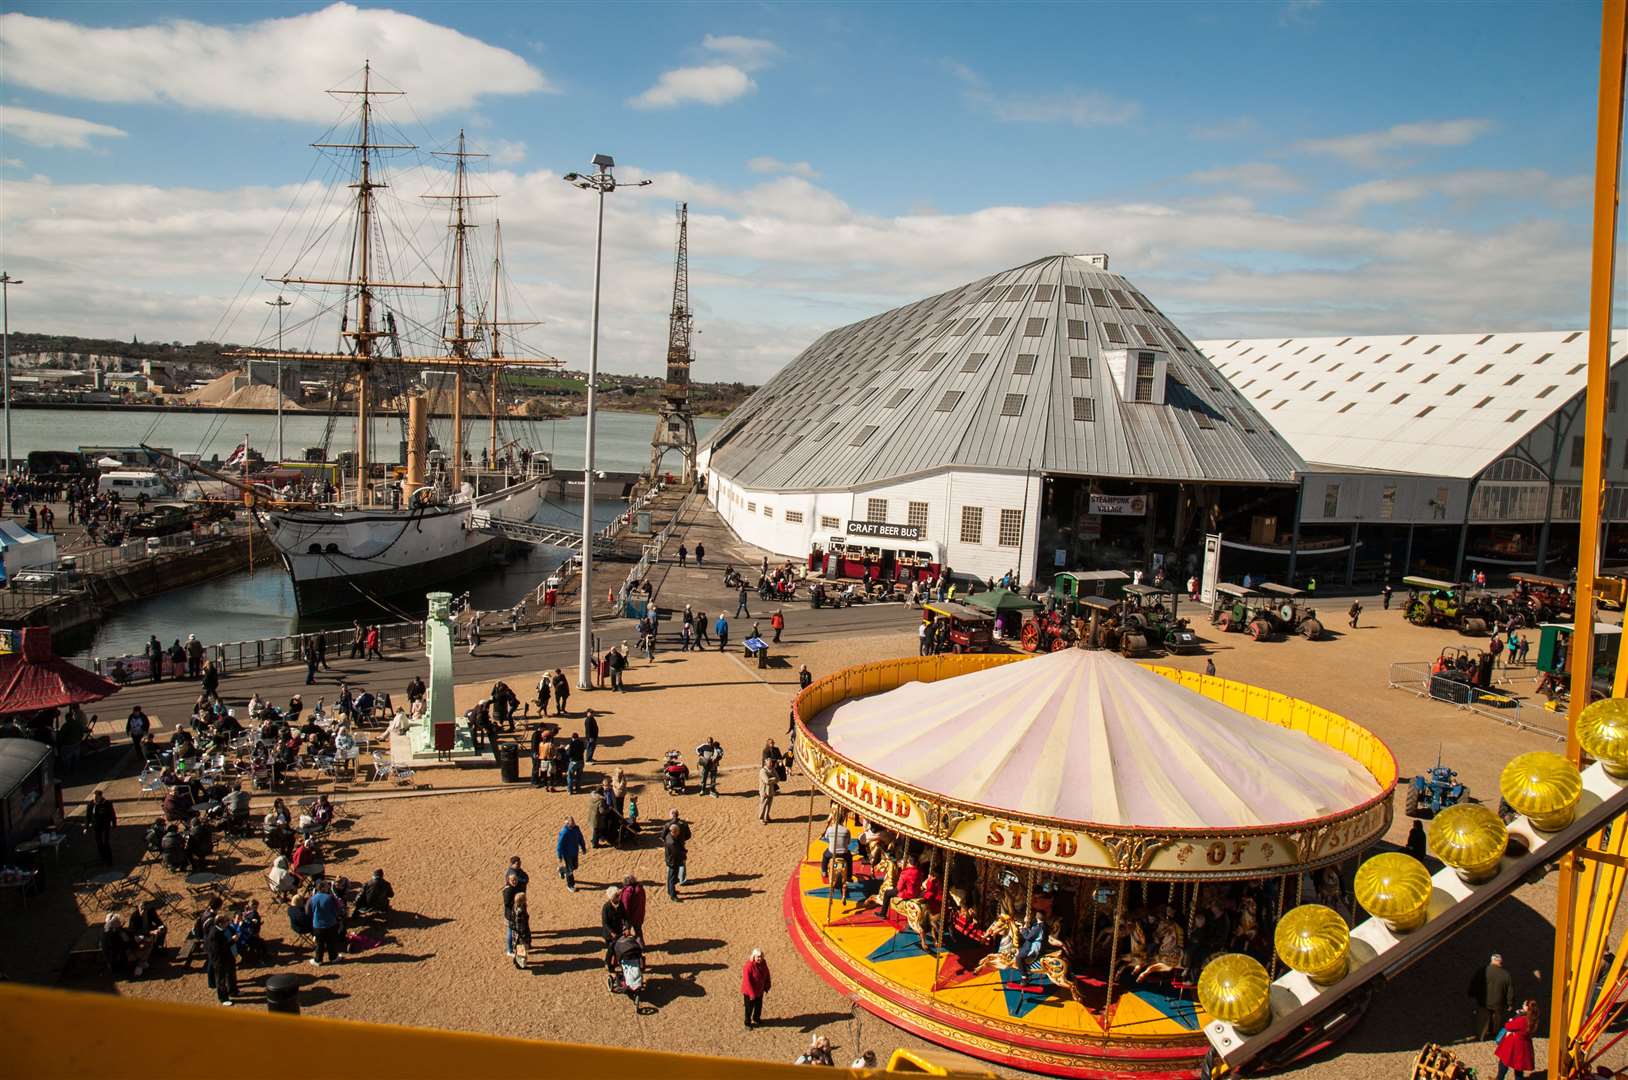 Chatham Historic Dockyard's Festival of Steam and Transport